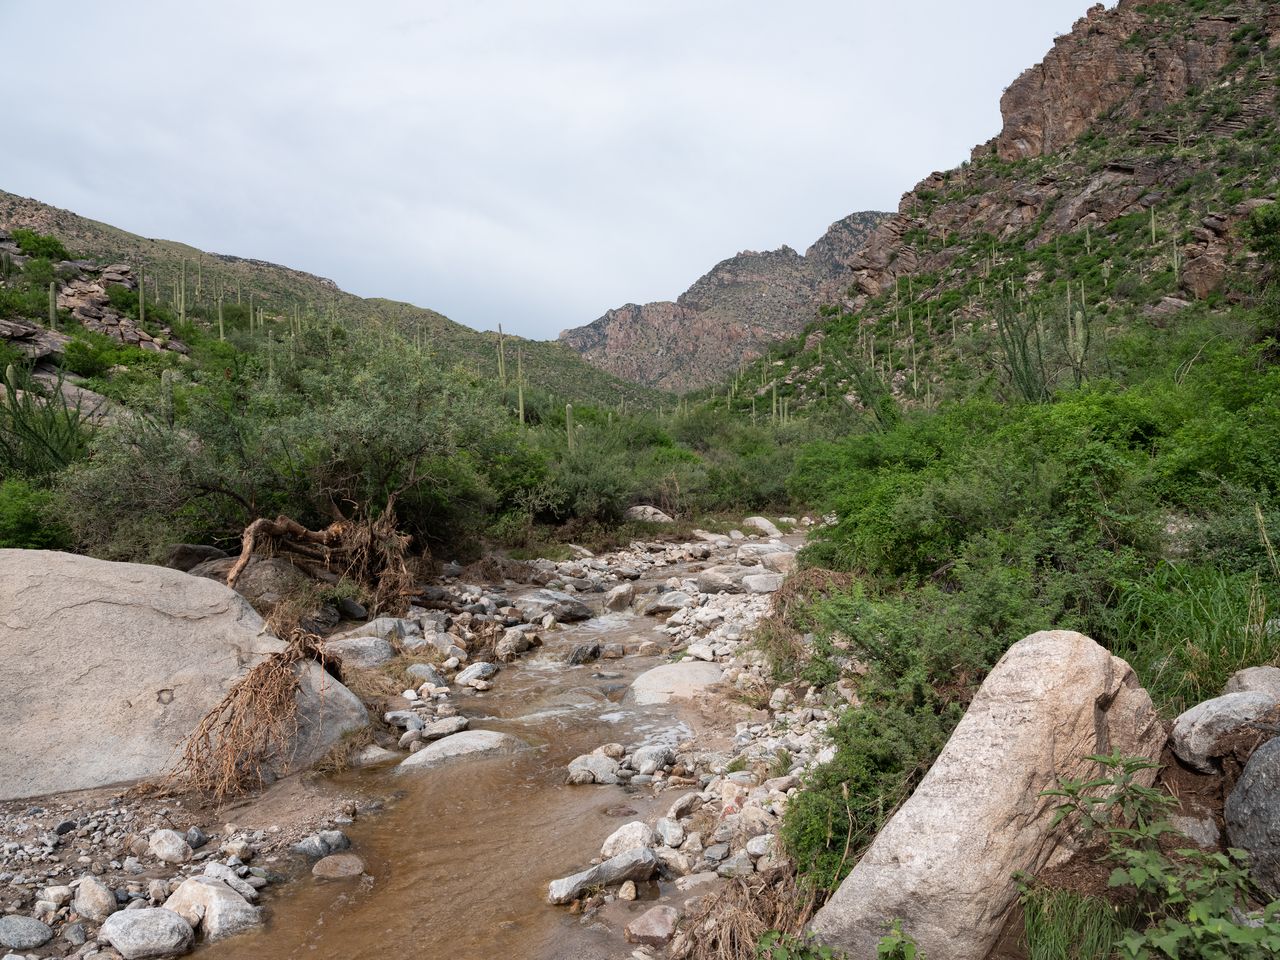 With lush greenery and water flowing in the river wash, Pima Canyon came alive after weeks of monsoon rains.